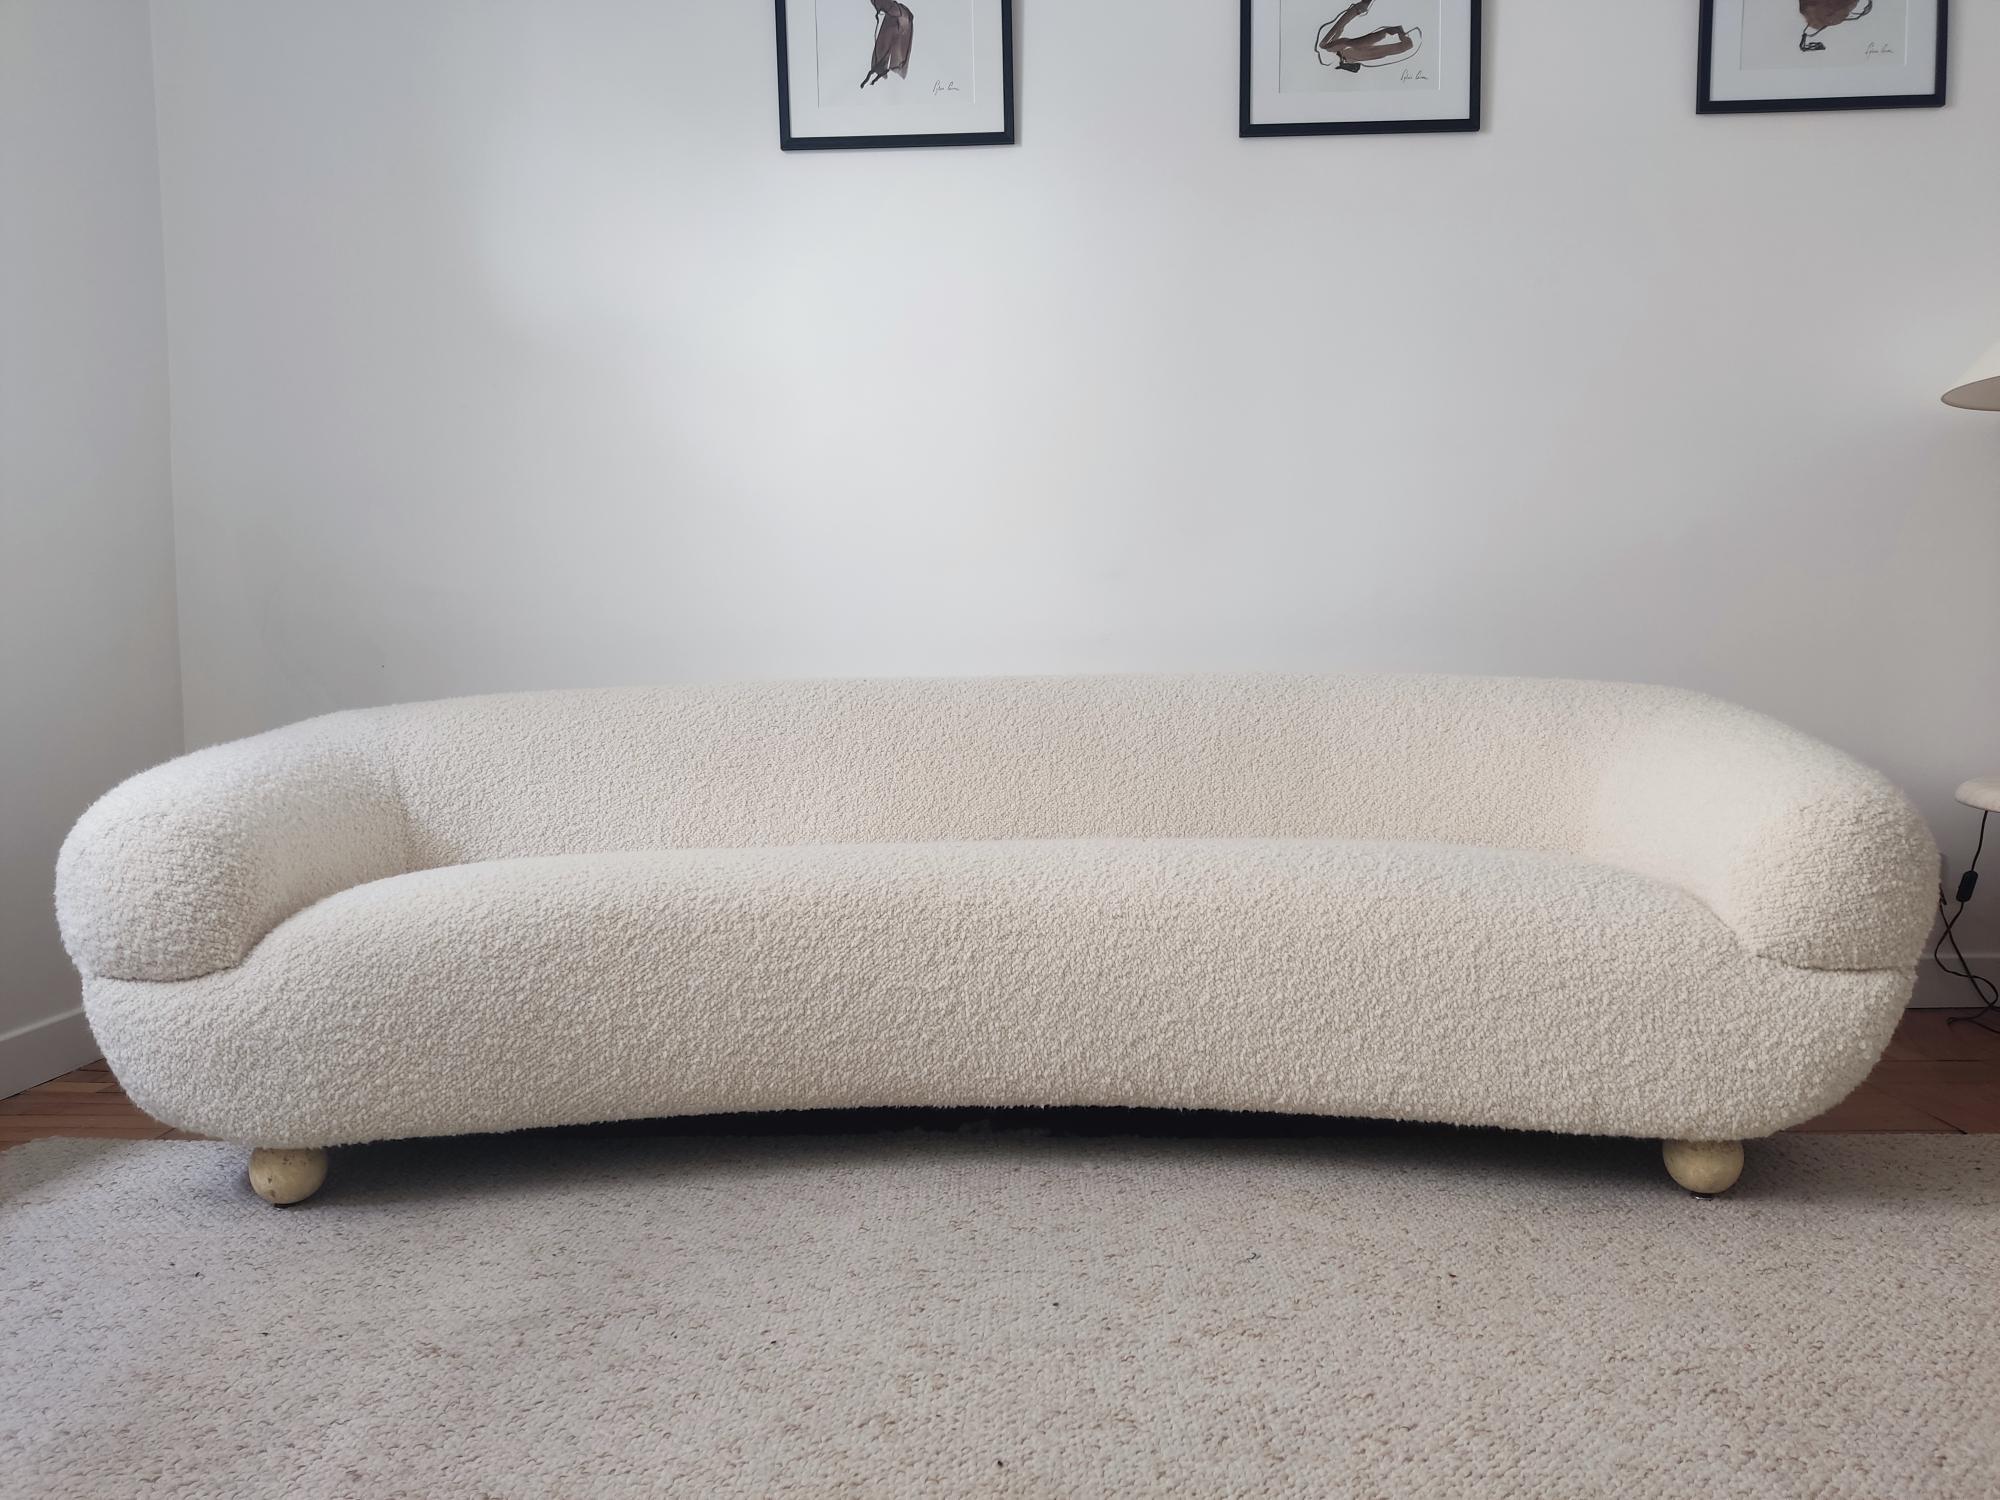 Fully restored 60s curved Italian sofa with warm and elegant textured fabric from an English maison. This elegant sofa is very comfortable and will add a lot of chic to your interior. The color of the fabric will easily adapt to different